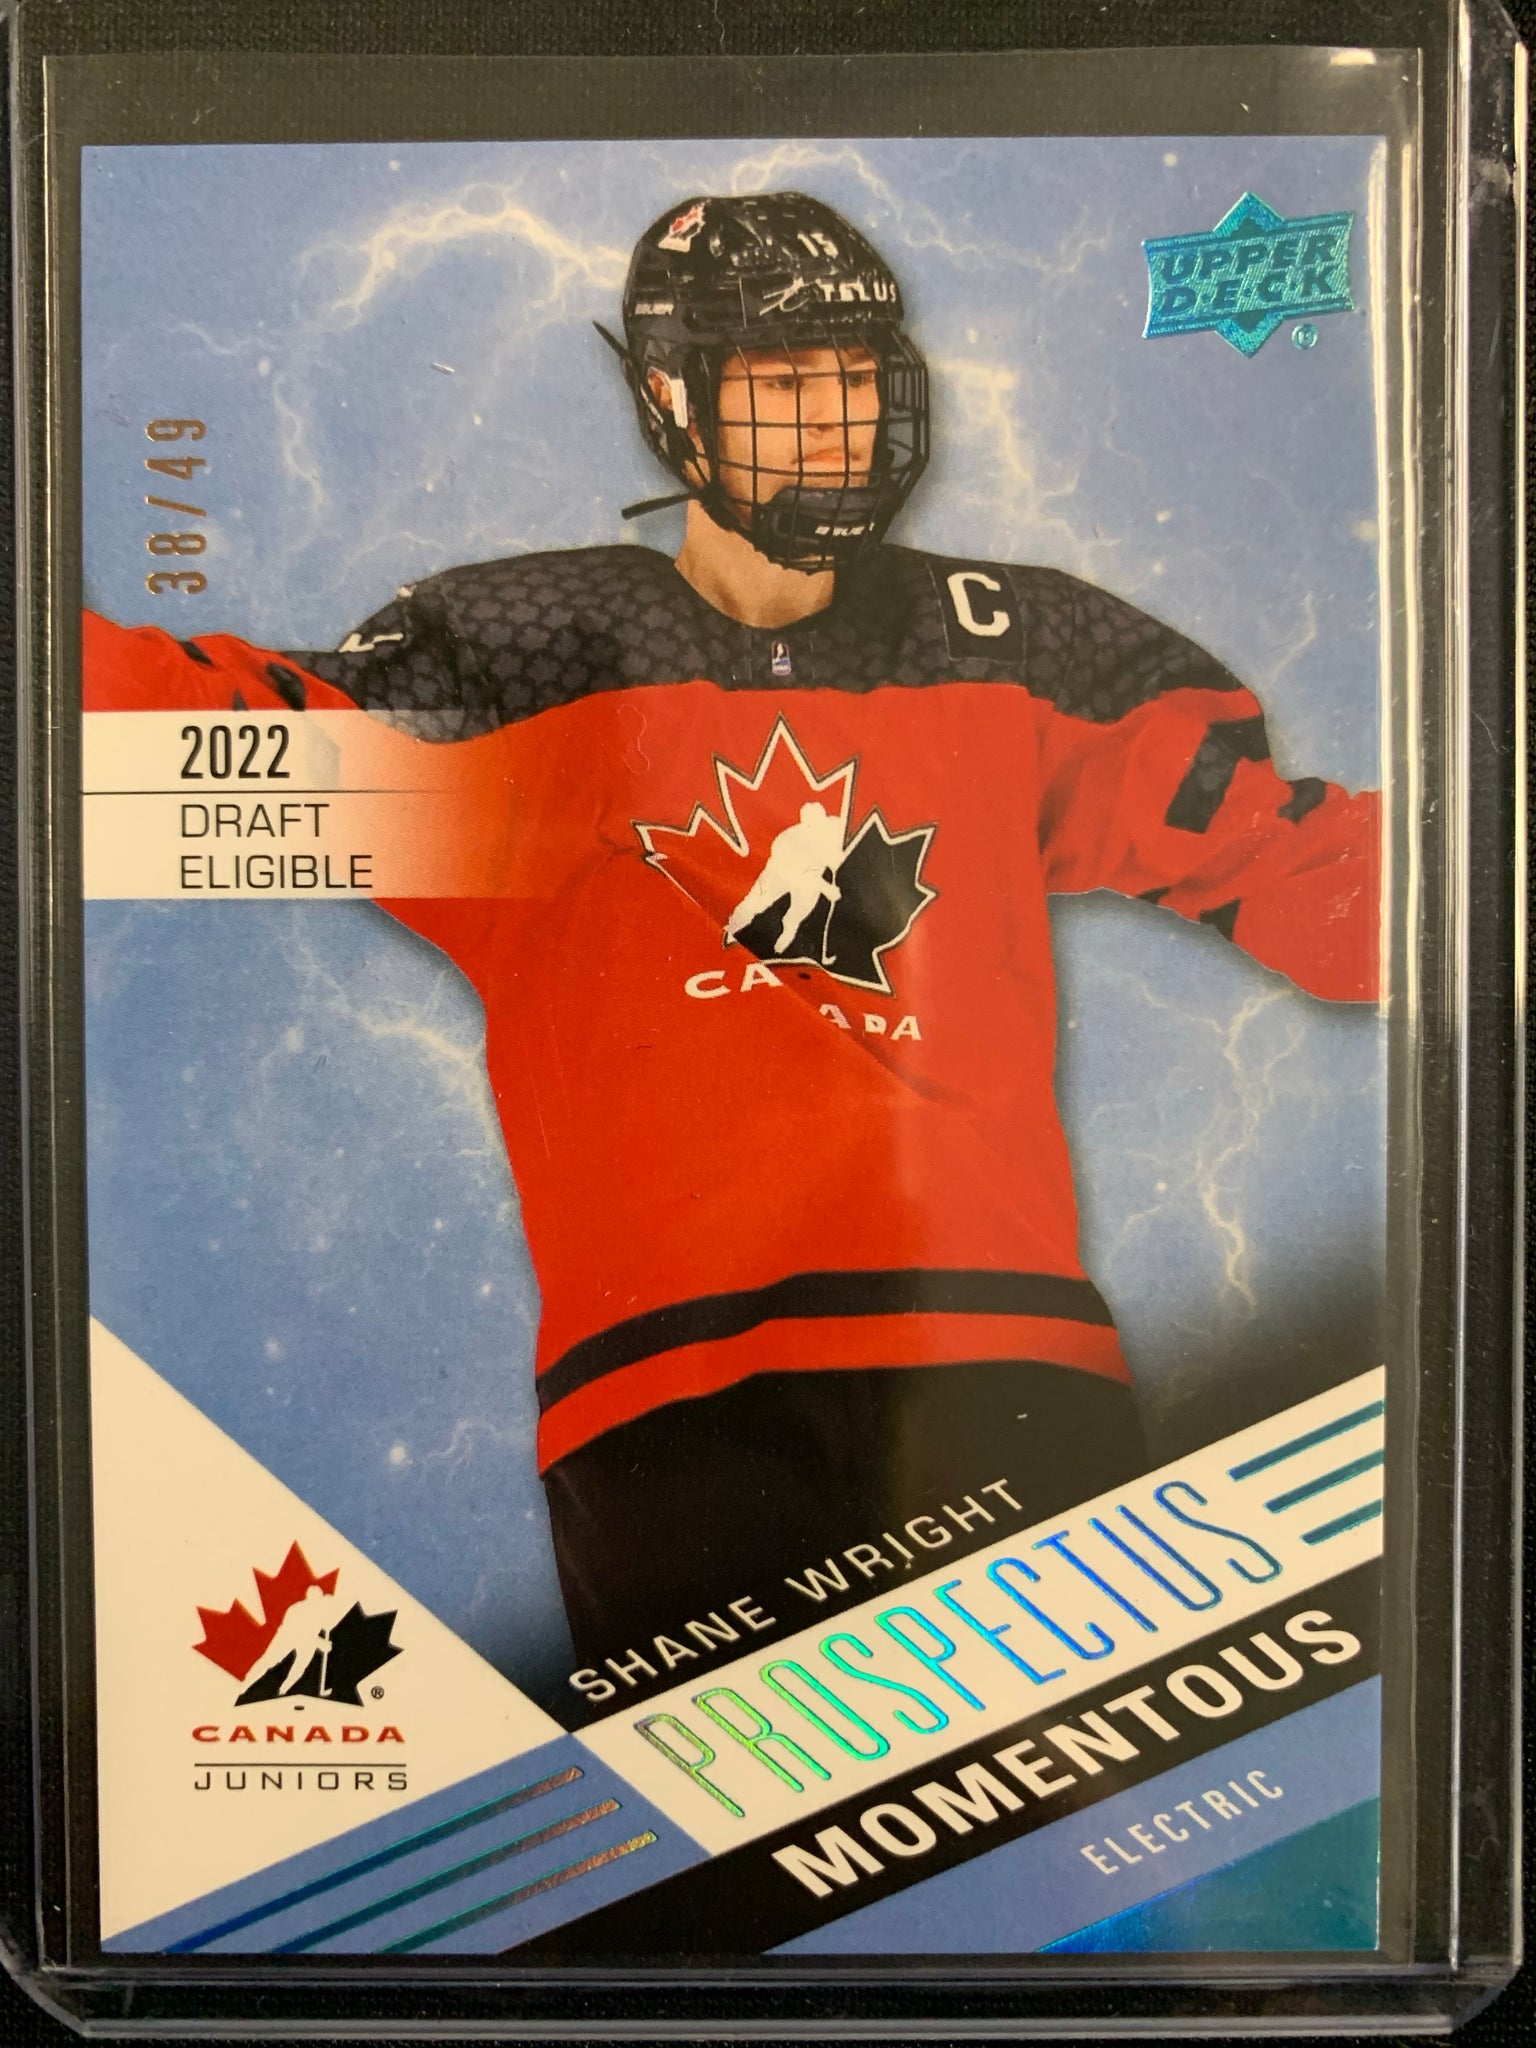 2021 UPPER DECK TEAM CANADA JUNIORS HOCKEY #PM-15 - SHANE WRIGHT PROSPECTUS ELECTRIC BLUE PARALLEL NUMBERED 38/49